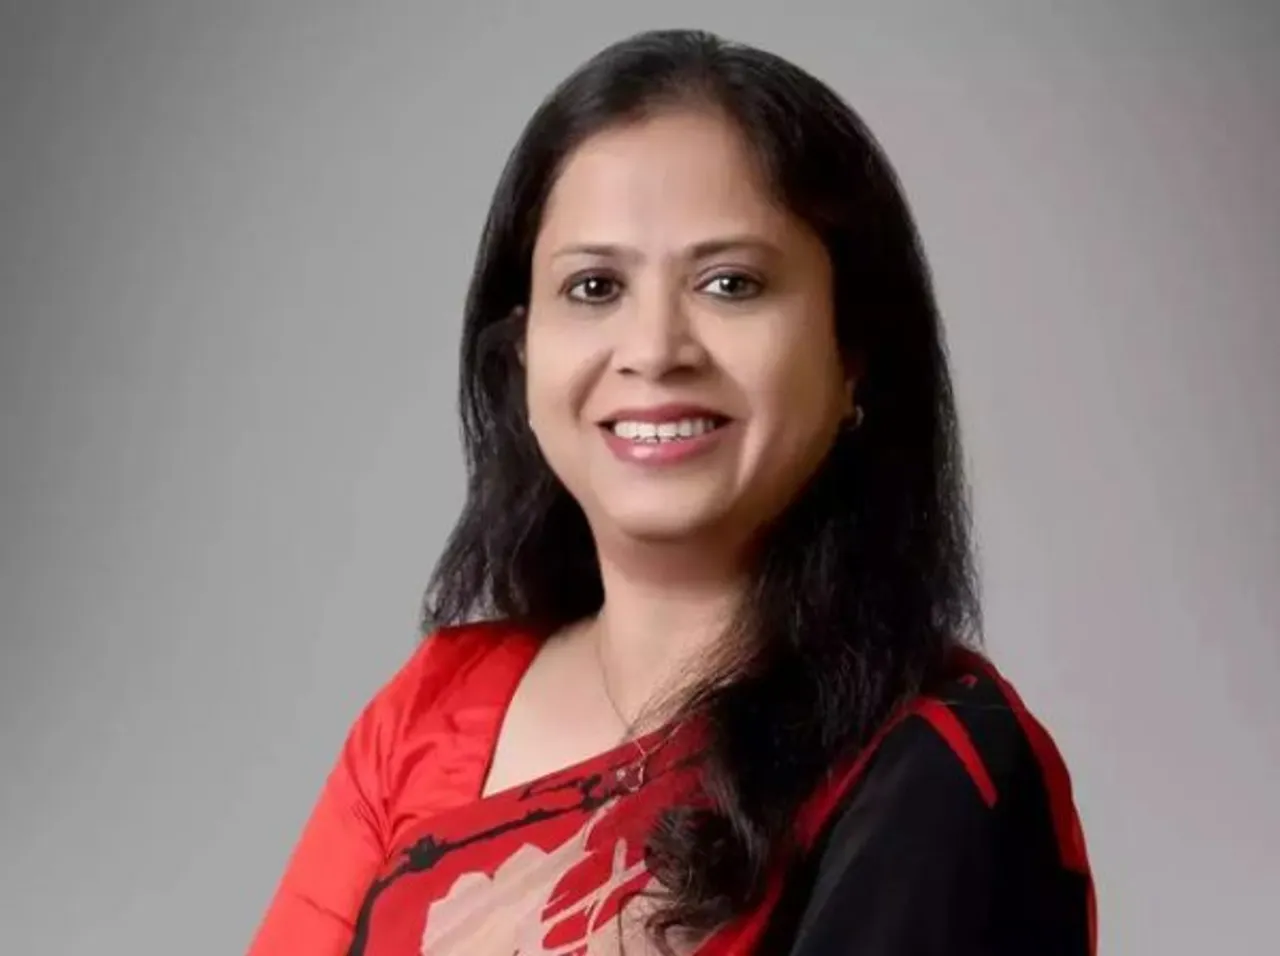 Who Is Prativa Mohapatra? First Woman To Lead Adobe India